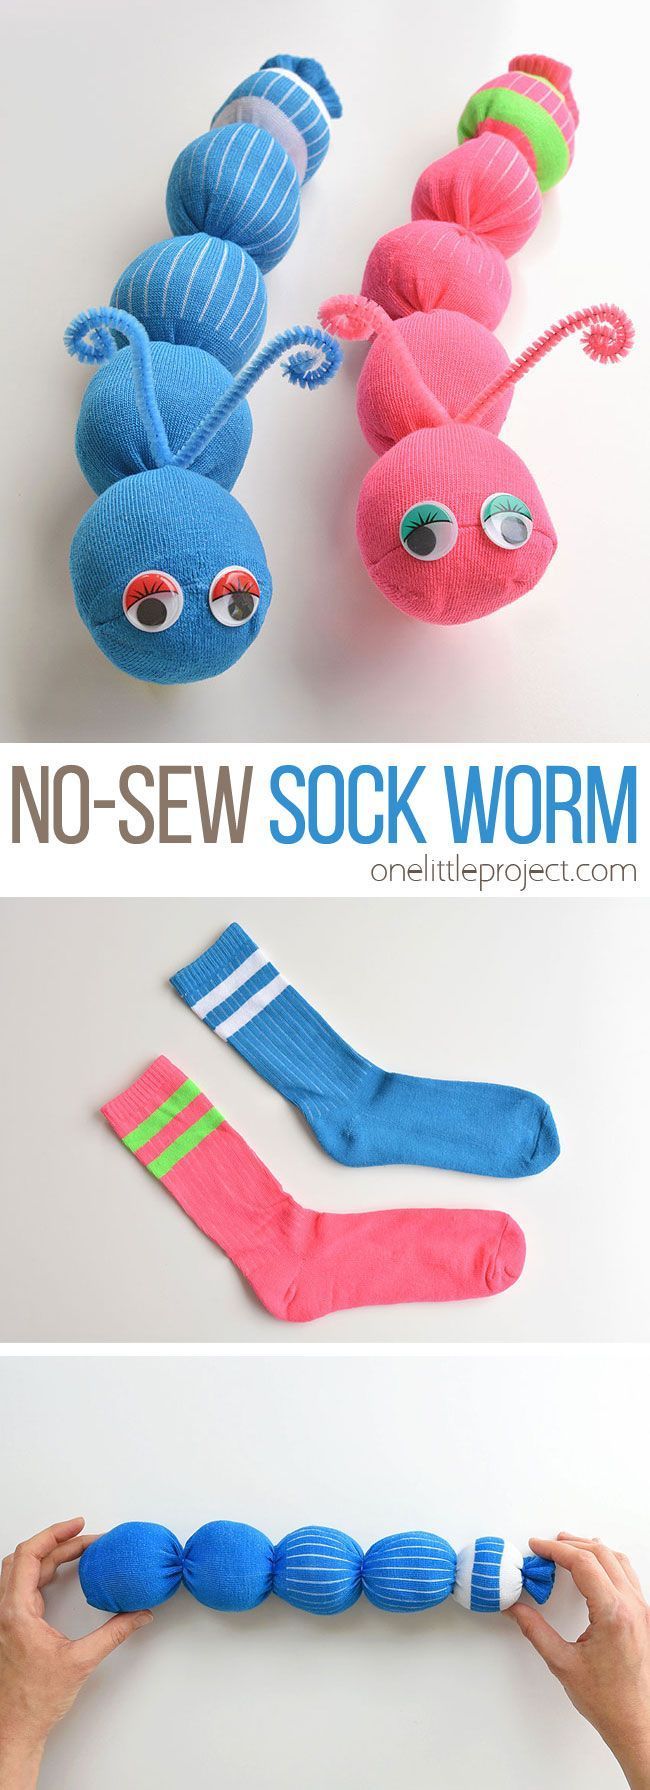 How to Make No-Sew Sock Worms | Easy Sock Worm Craft for Kids -   19 fabric crafts No Sew simple ideas